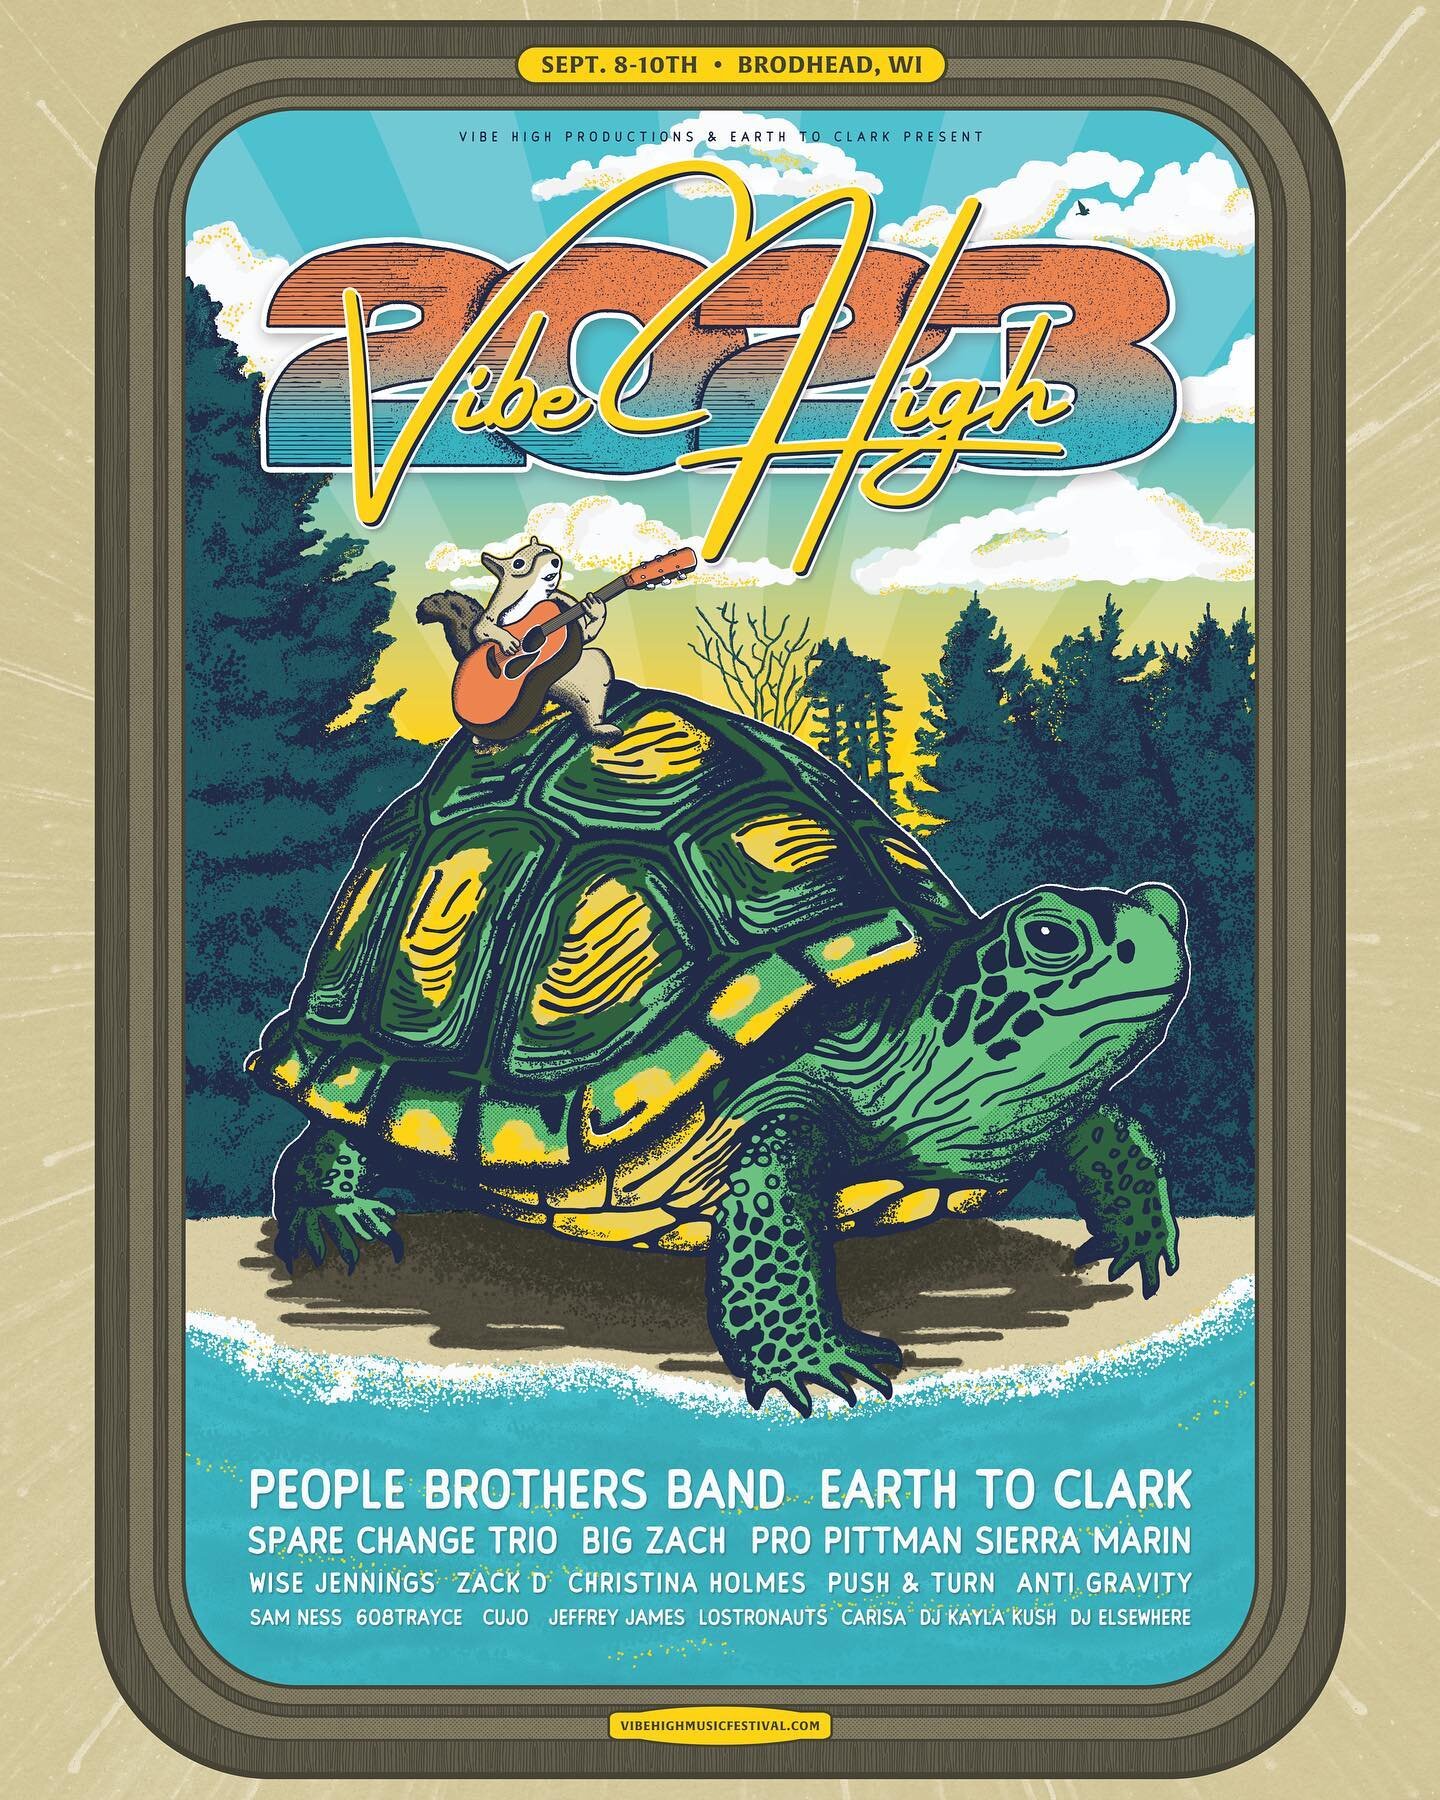 @vibe_high_productions &amp; @earthtoclark are excited to present to you the full line-up for this year's 6th Annual Vibe High Music Festival at Sweet Minihaha Campground in beautiful Brodhead, WI! 🏕️

Join us in welcoming @peoplebrothersband, @spar